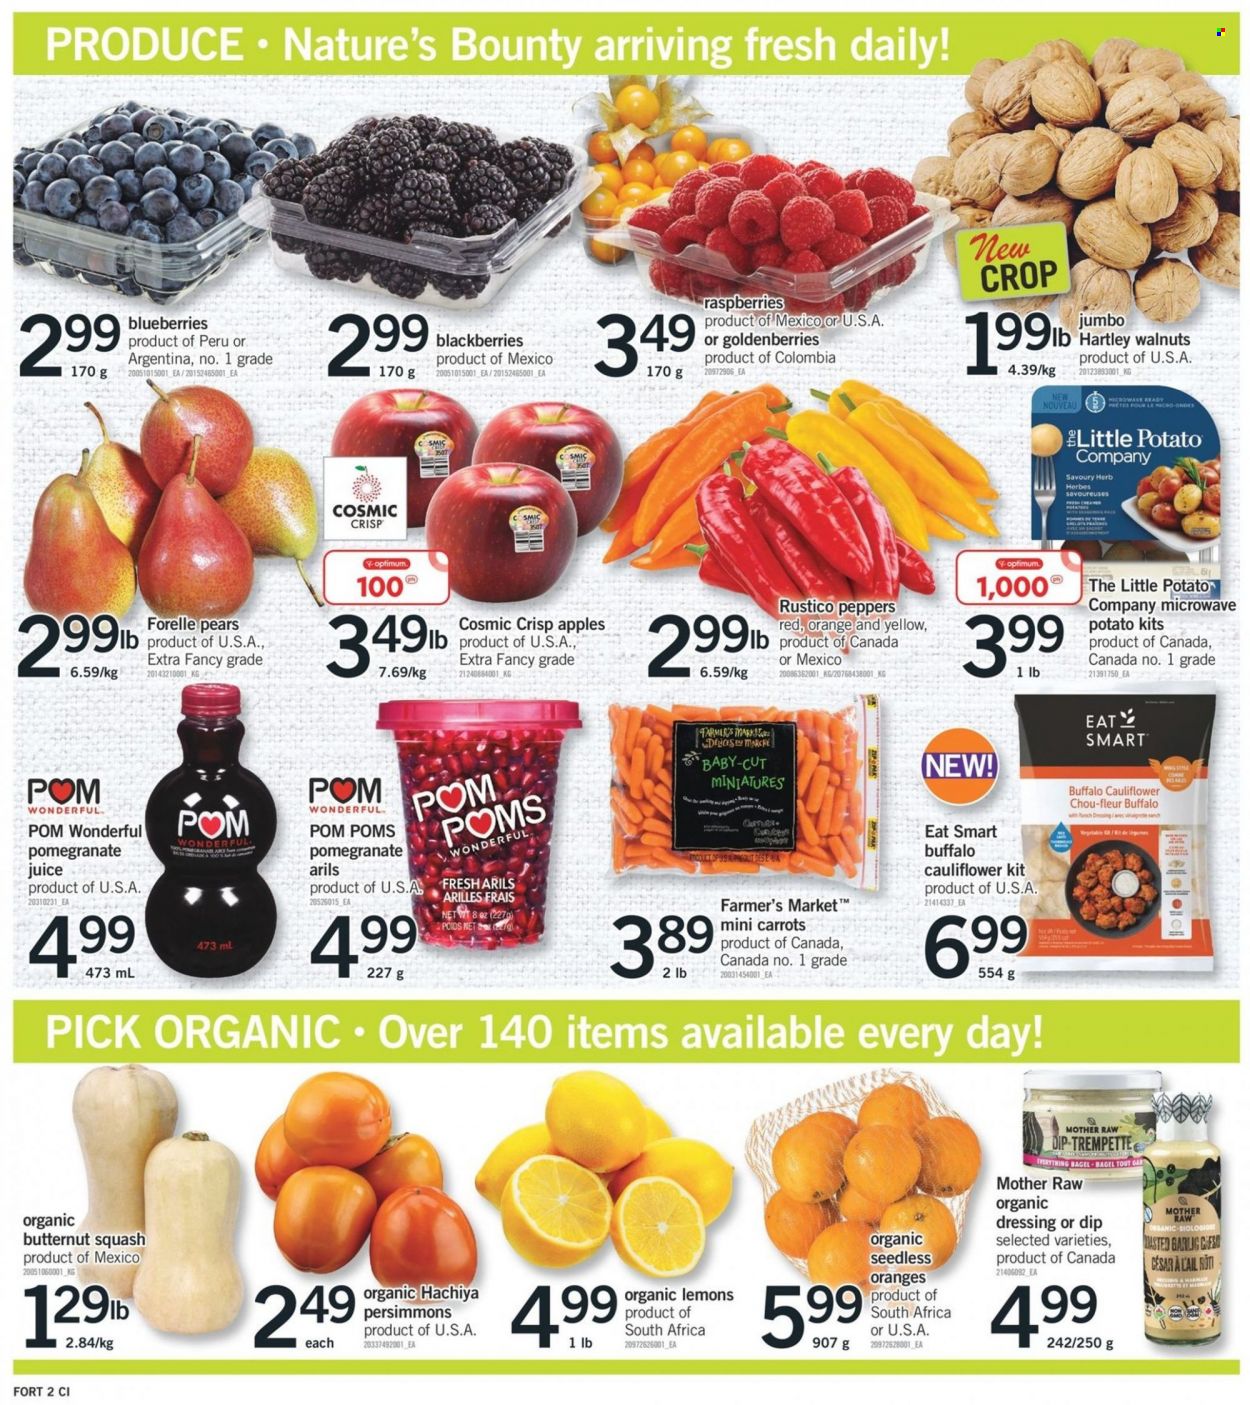 thumbnail - Fortinos Flyer - November 25, 2021 - December 01, 2021 - Sales products - bagels, butternut squash, carrots, garlic, peppers, apples, blackberries, blueberries, pears, persimmons, pomegranate, lemons, dip, herbs, dressing, walnuts, juice, Optimum, microwave, Pom Poms, Nature's Bounty, oranges. Page 3.